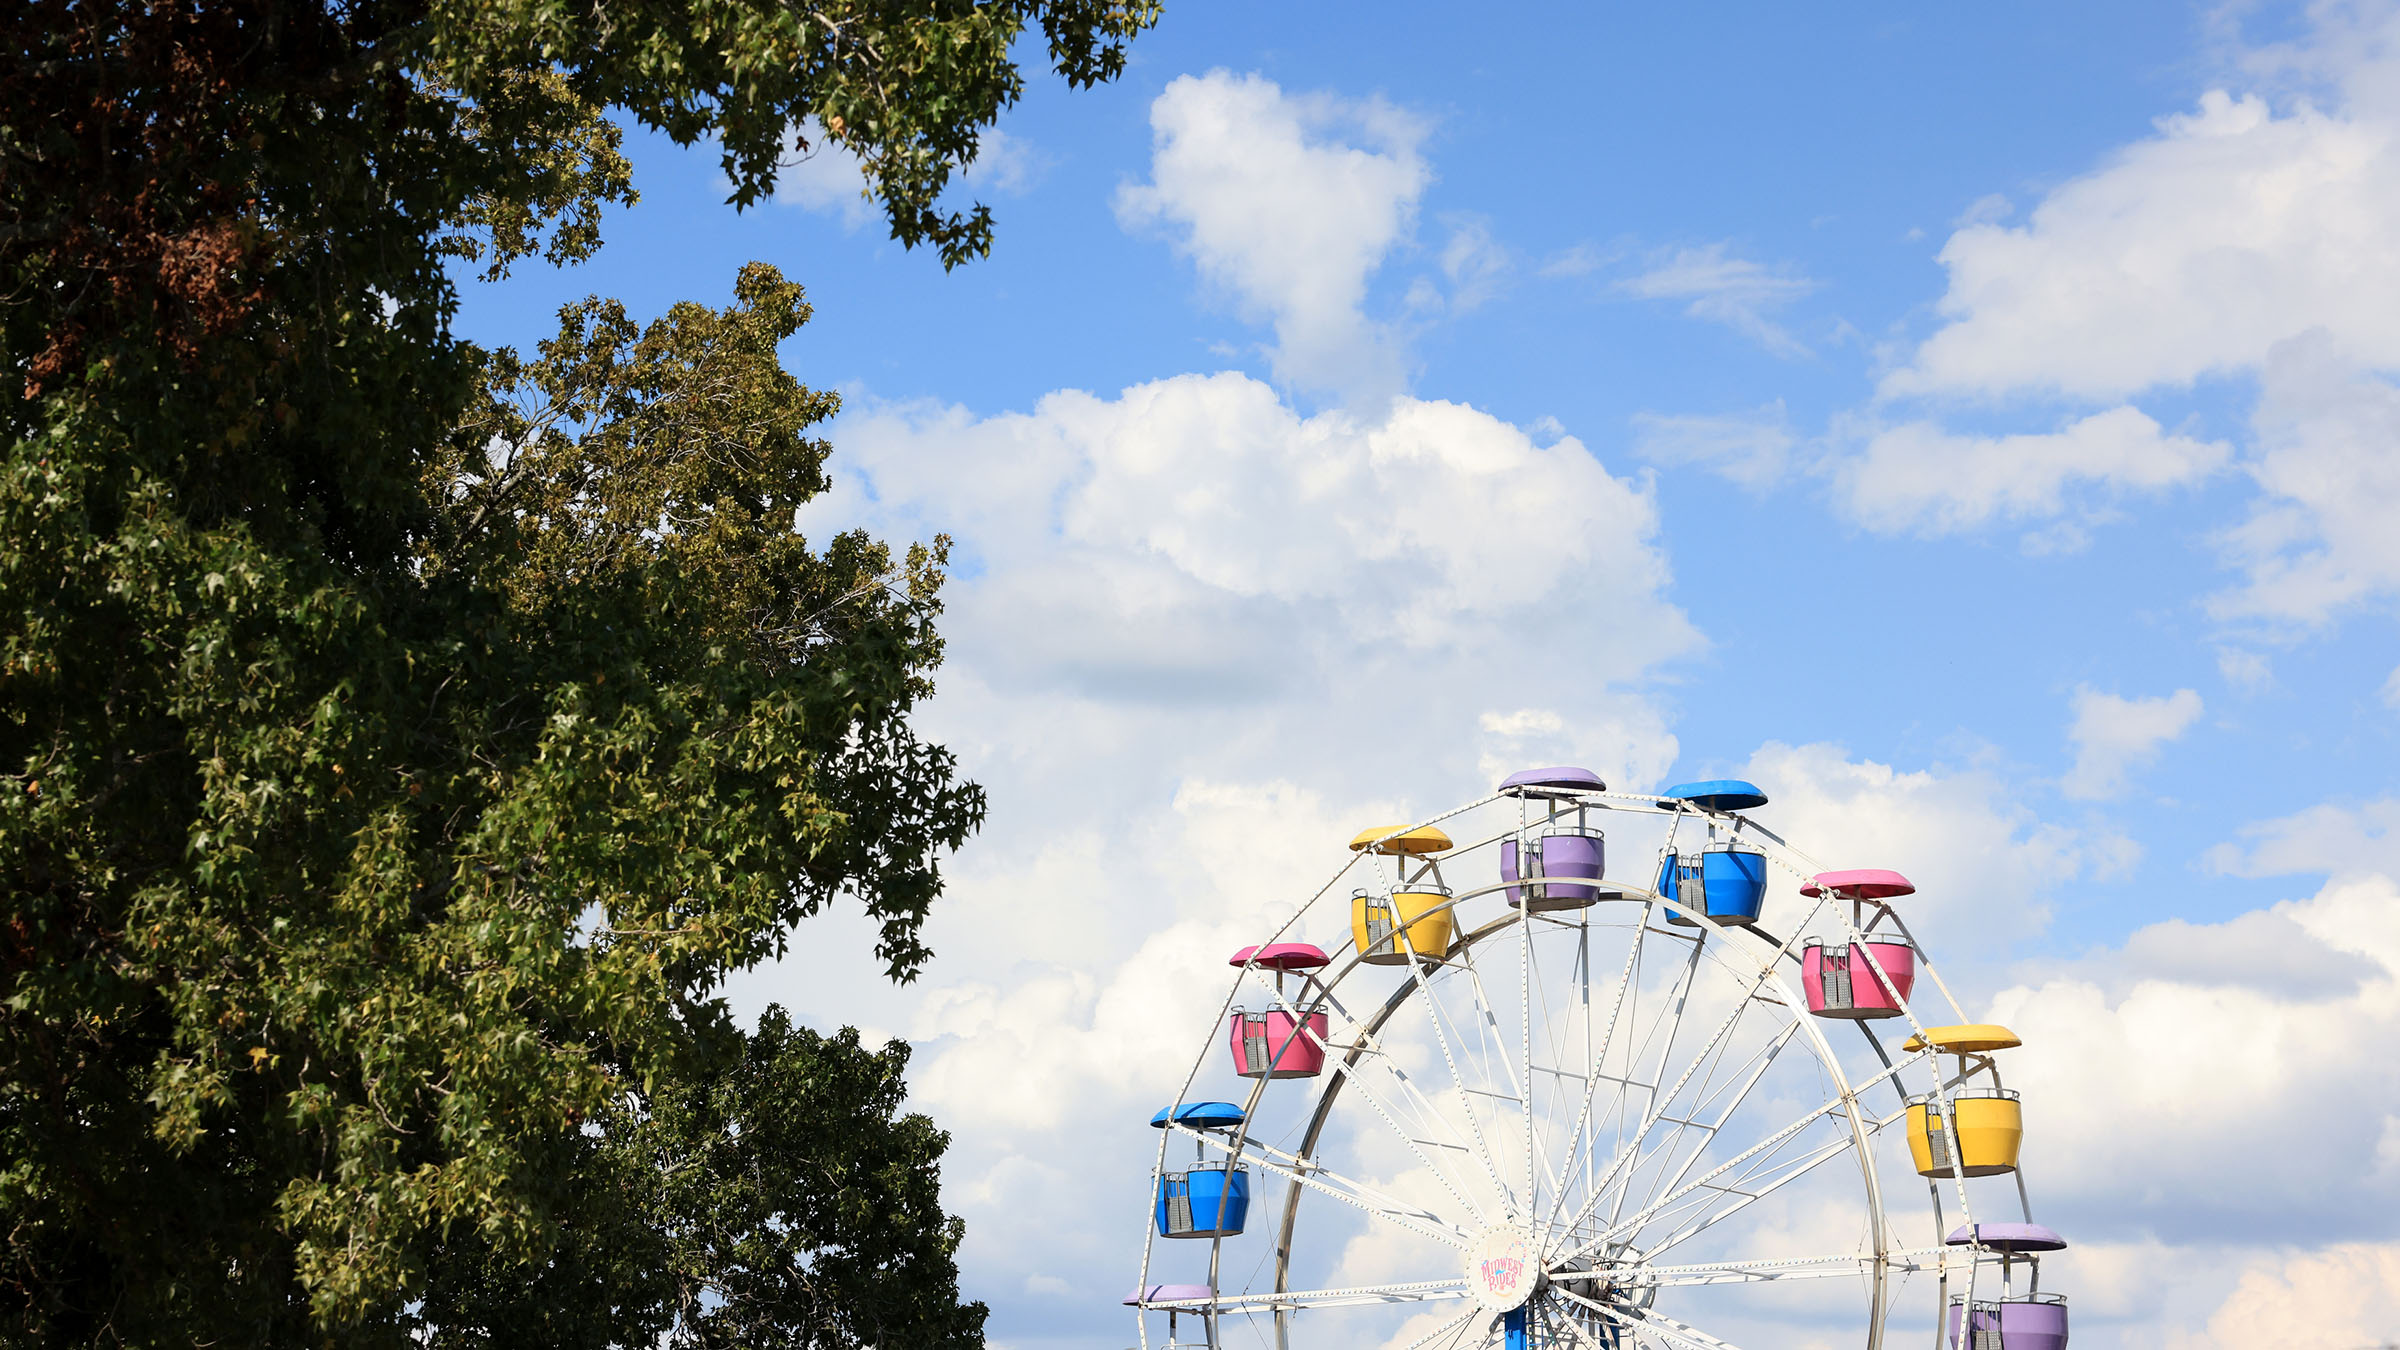 A ferris wheel is framed by green trees to the left, with a blue sky and clouds behind.